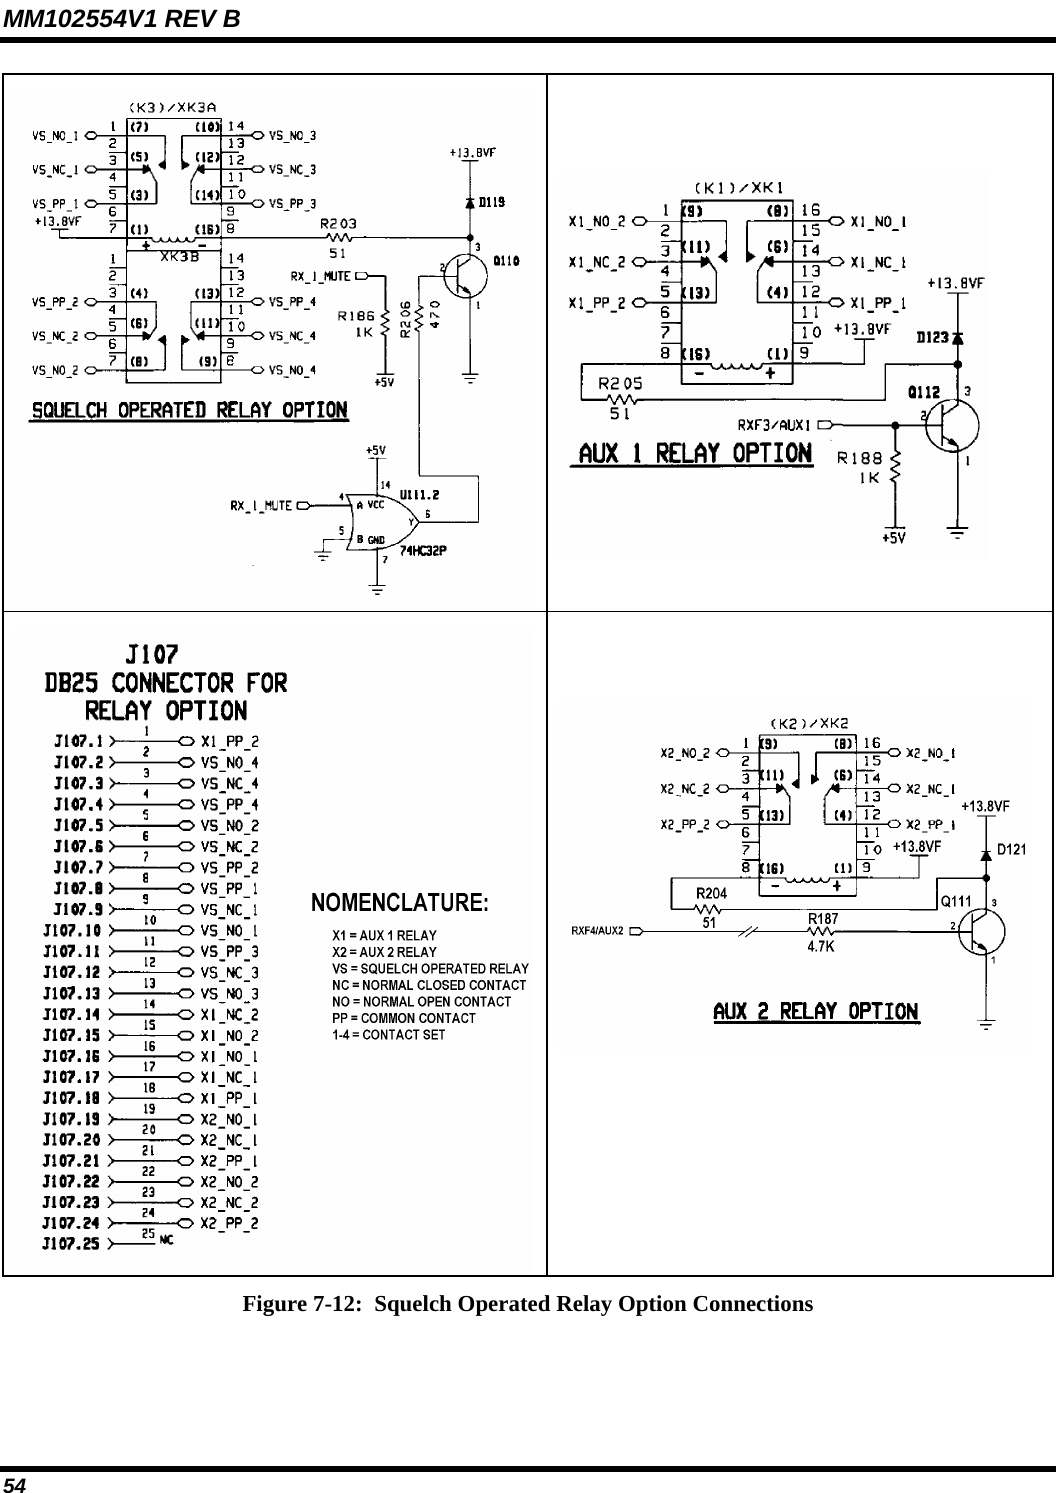 MM102554V1 REV B 54       Figure 7-12:  Squelch Operated Relay Option Connections 